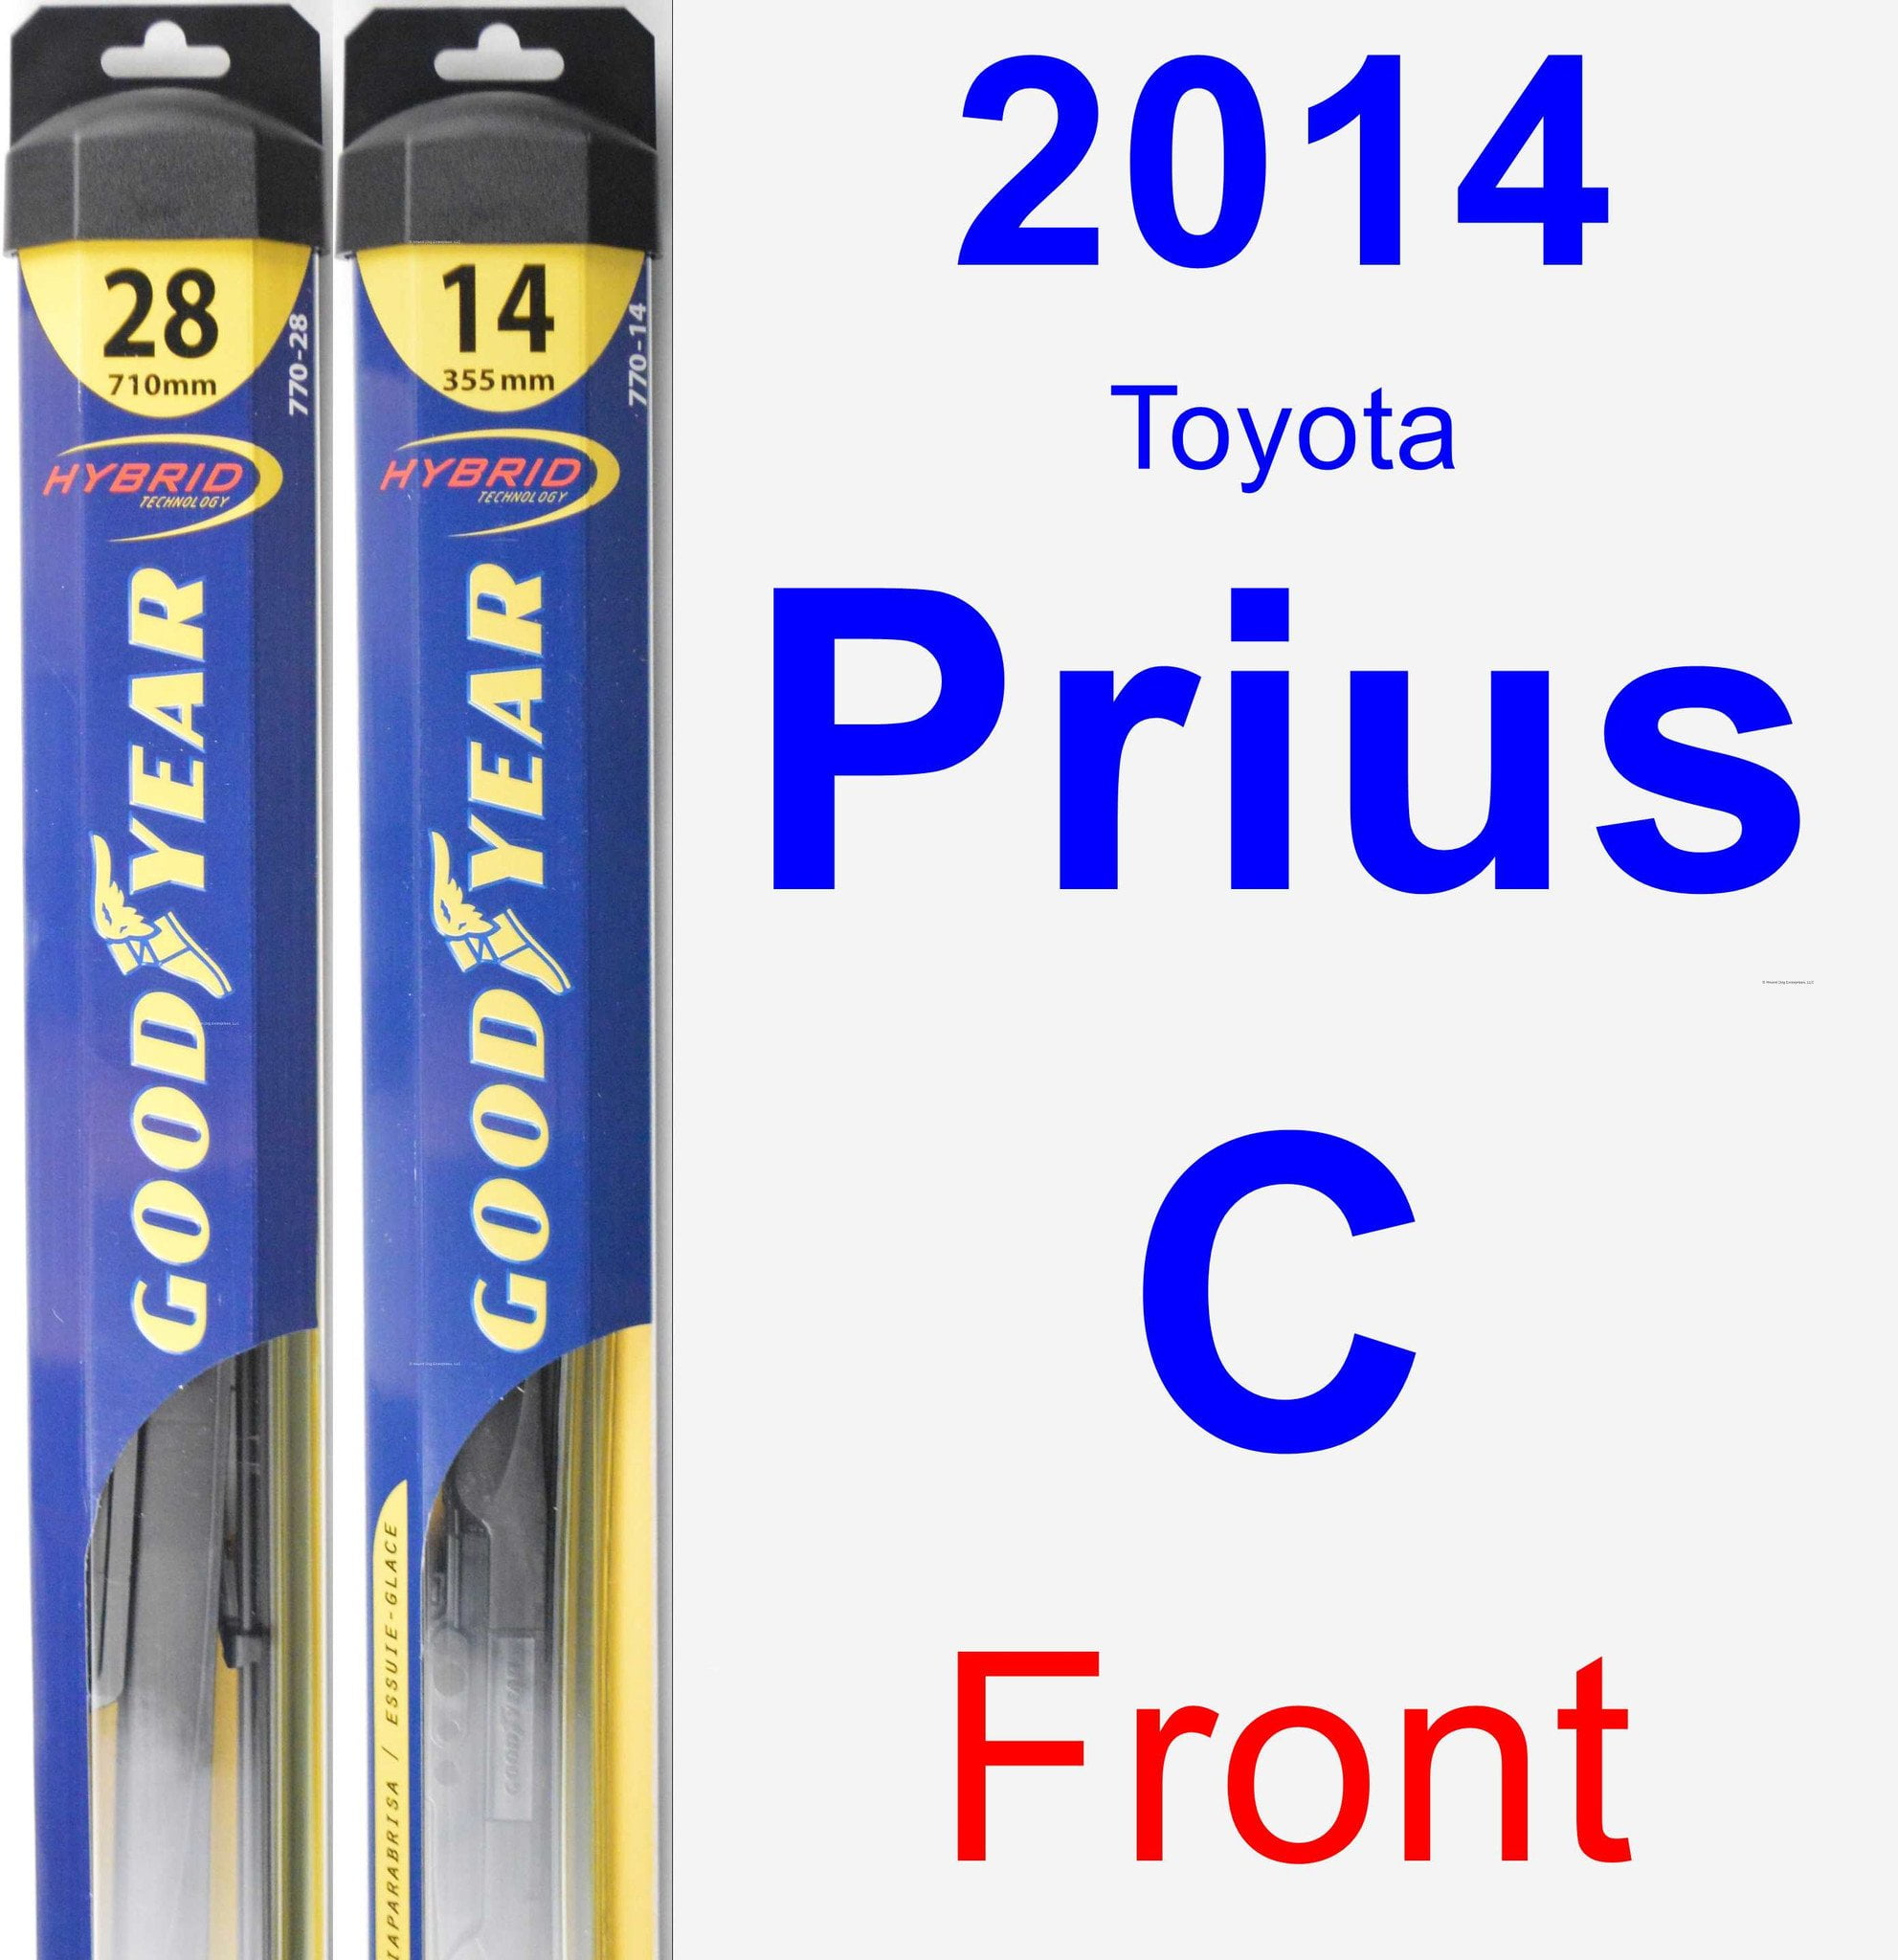 2014 Toyota Prius C Wiper Blade Set/Kit (Front) (2 Blades) - Hybrid - Walmart.com - Walmart.com 2014 Toyota Prius C Windshield Wipers Size